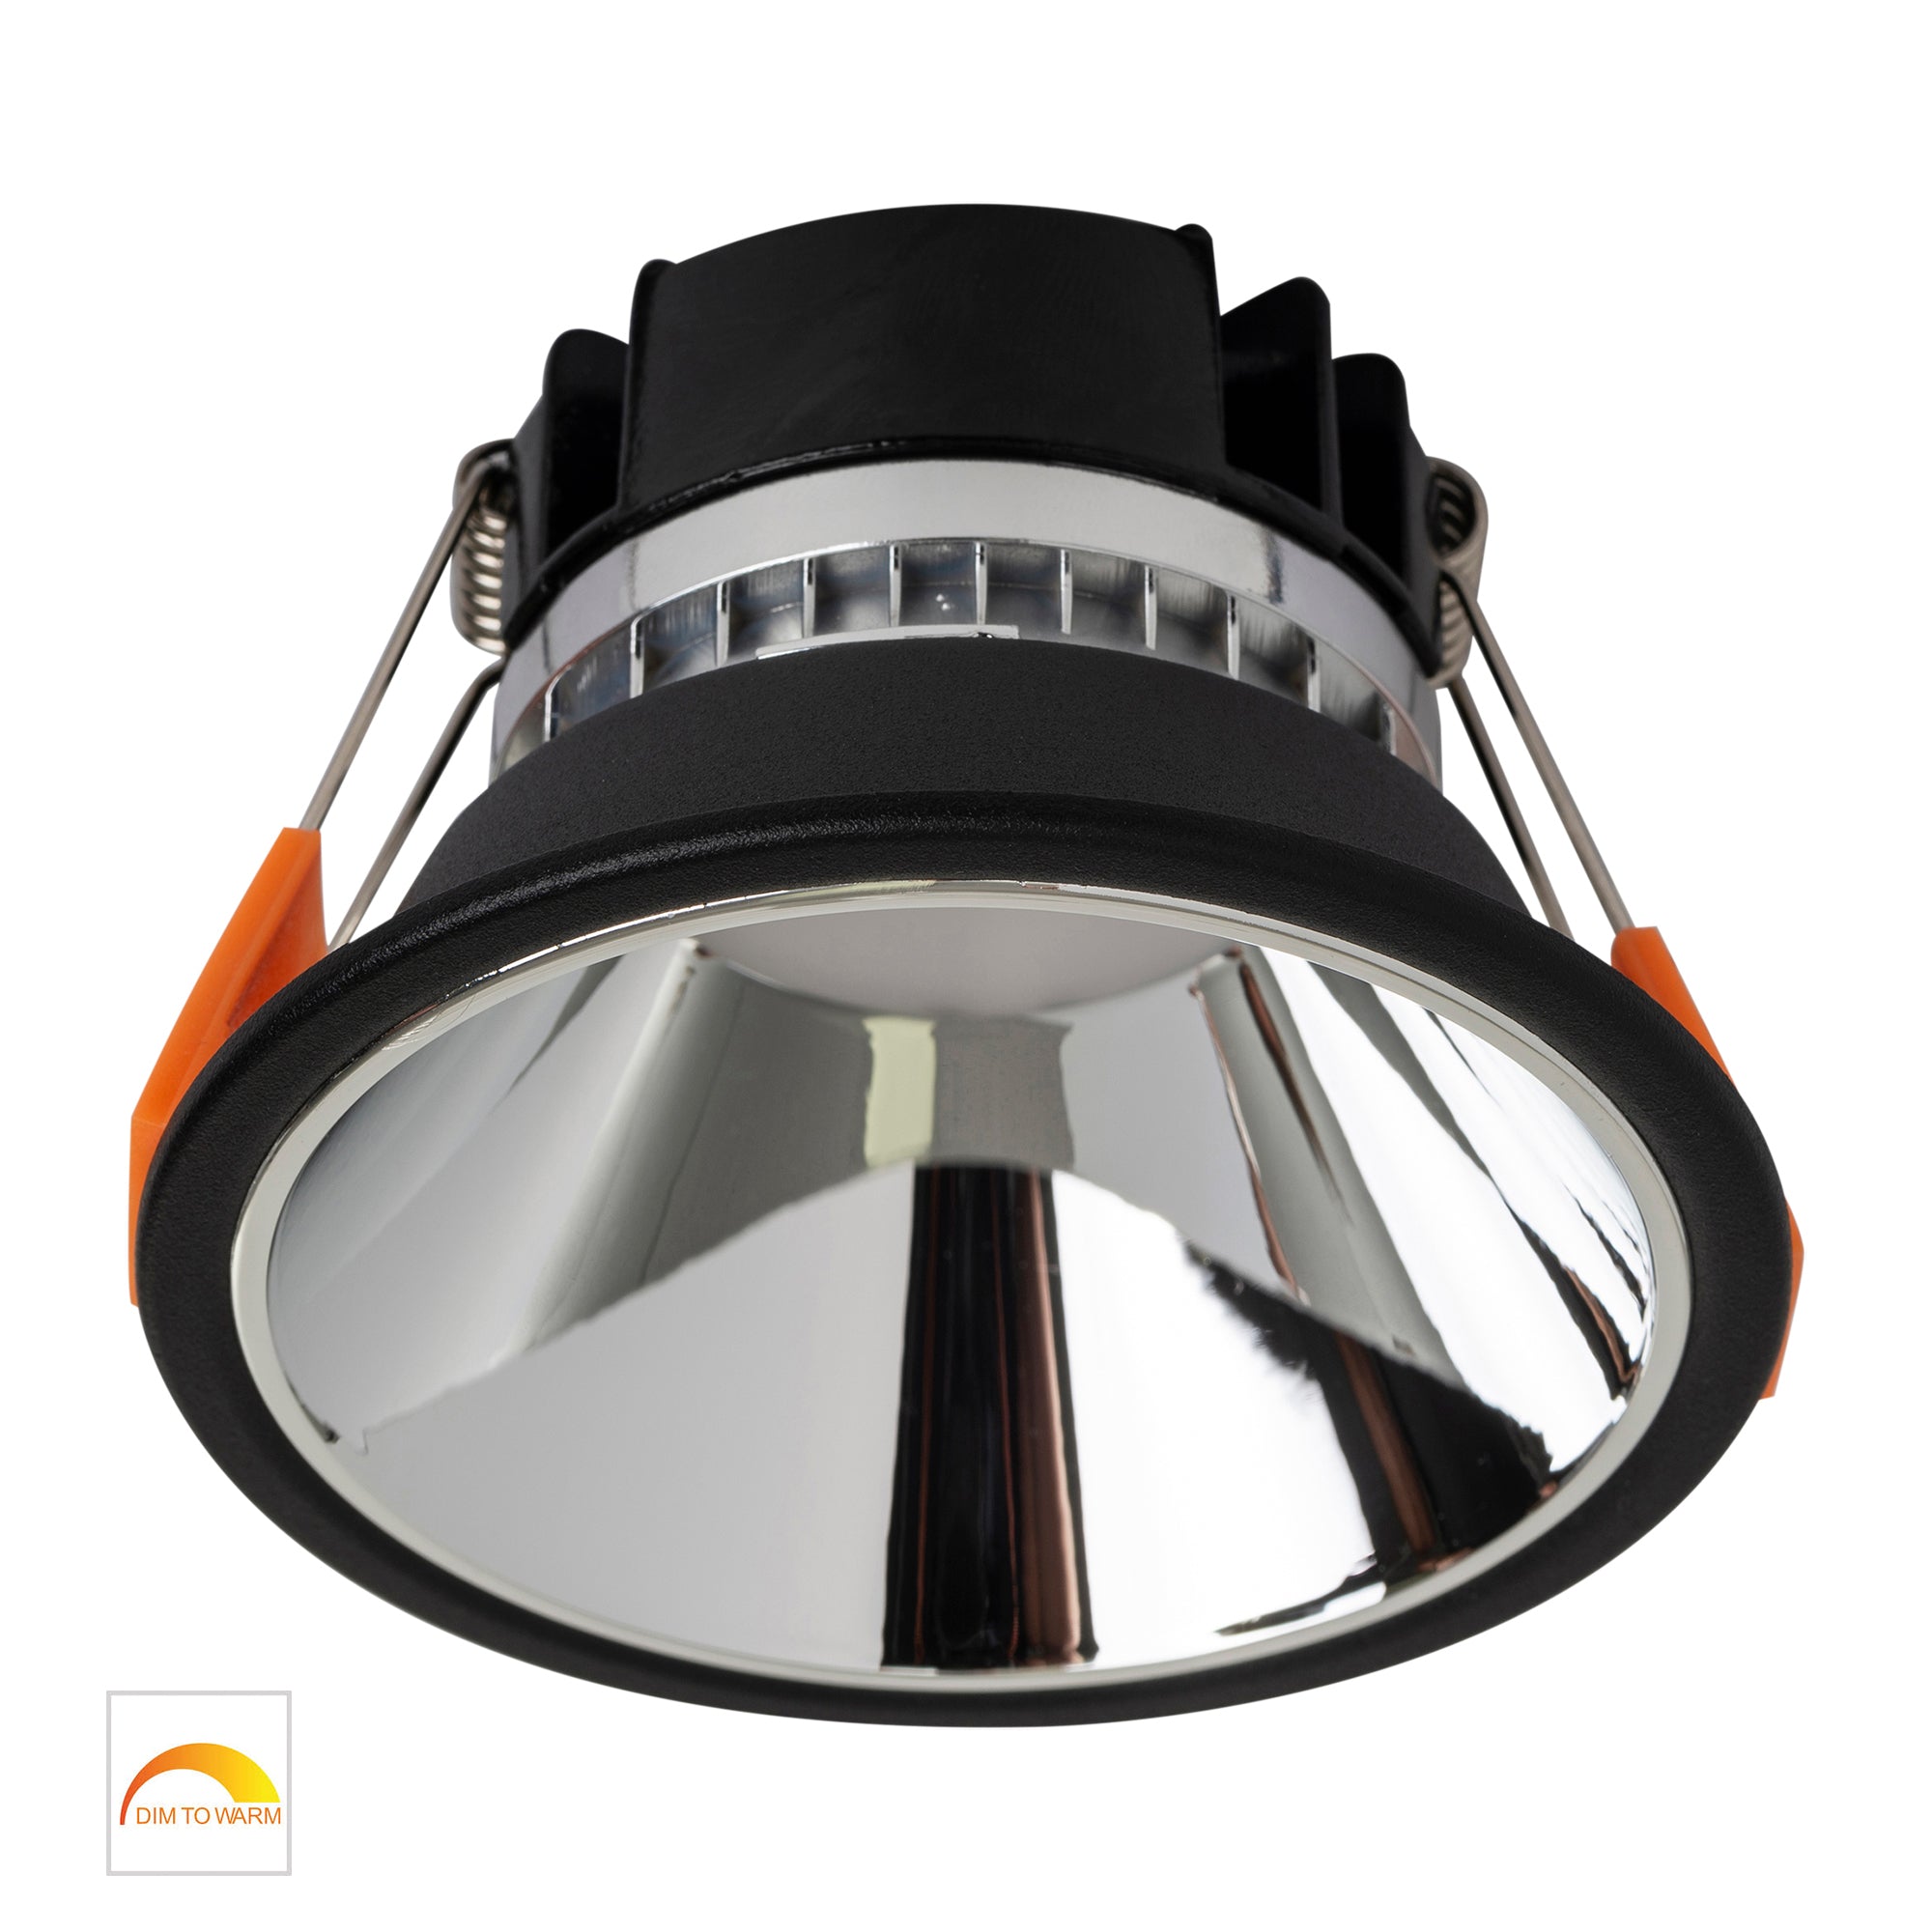 HV5528D2W-BC - Gleam Black with Chrome Insert Fixed Dim to Warm LED Downlight